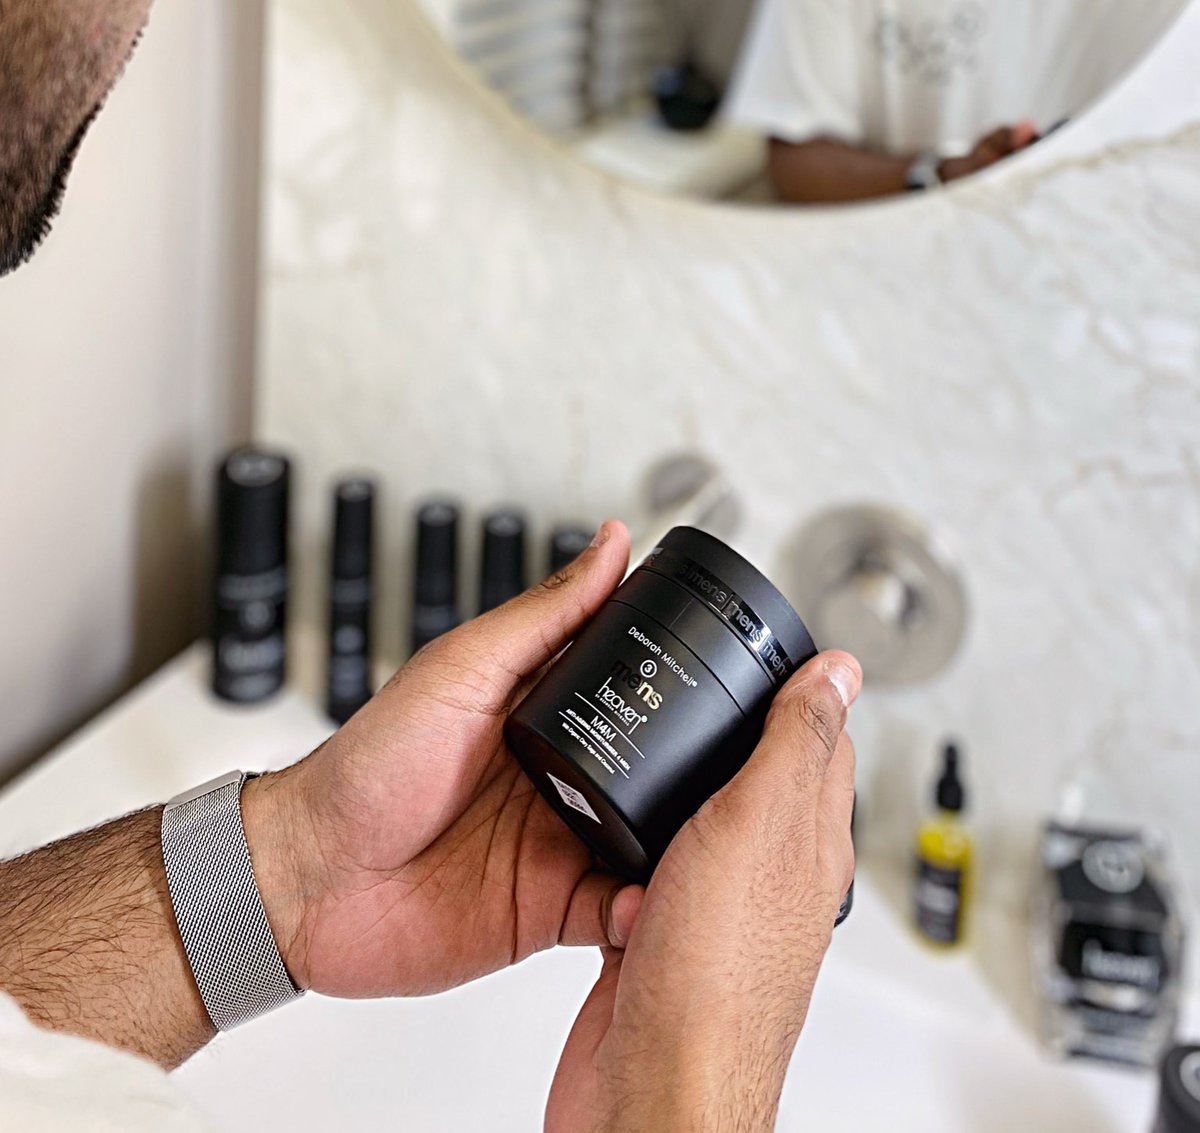 #GroomingTips Use a lightweight moisturiser to nourish and hydrate, locking in moisture and preventing dryness. M4M provides essential nutrients to feed the skin, improve fine lines and tackle those tell-tale signs of ageing #HeavenSkincare #FathersDay shop.heavenskincare.com/m4m-anti-agein…